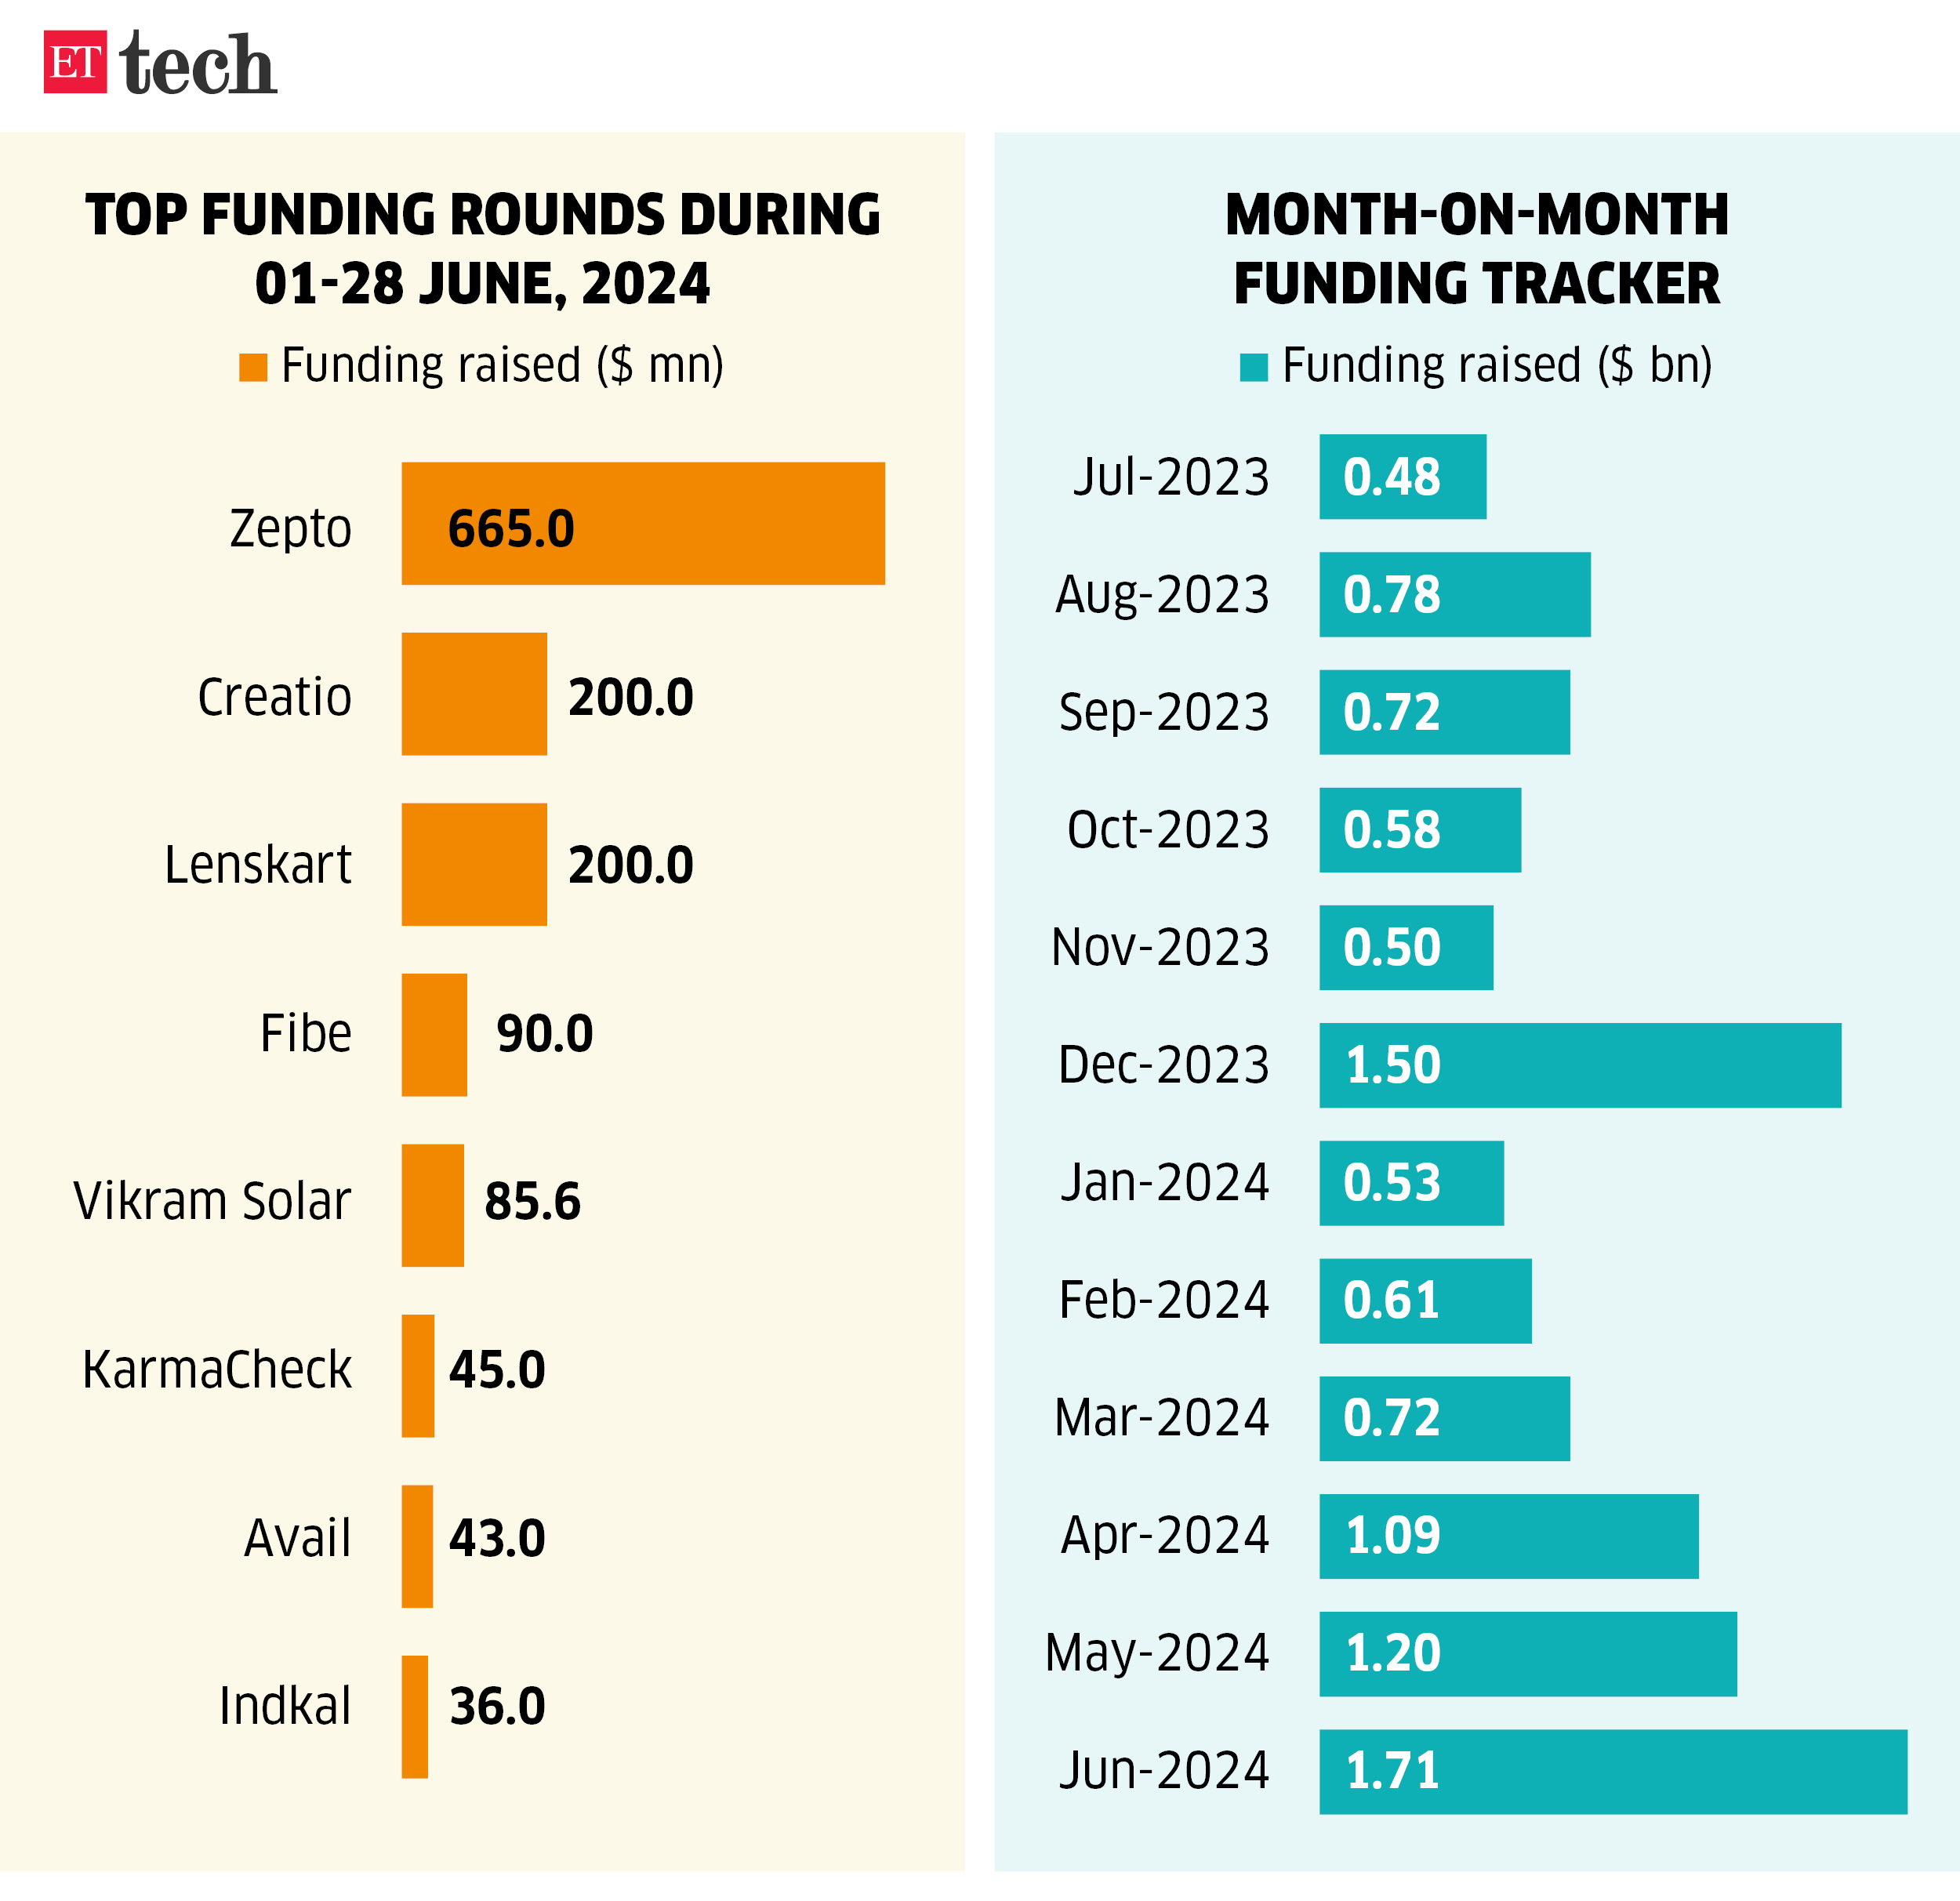 Top funding rounds during 01 28 June 2024 ETTECH